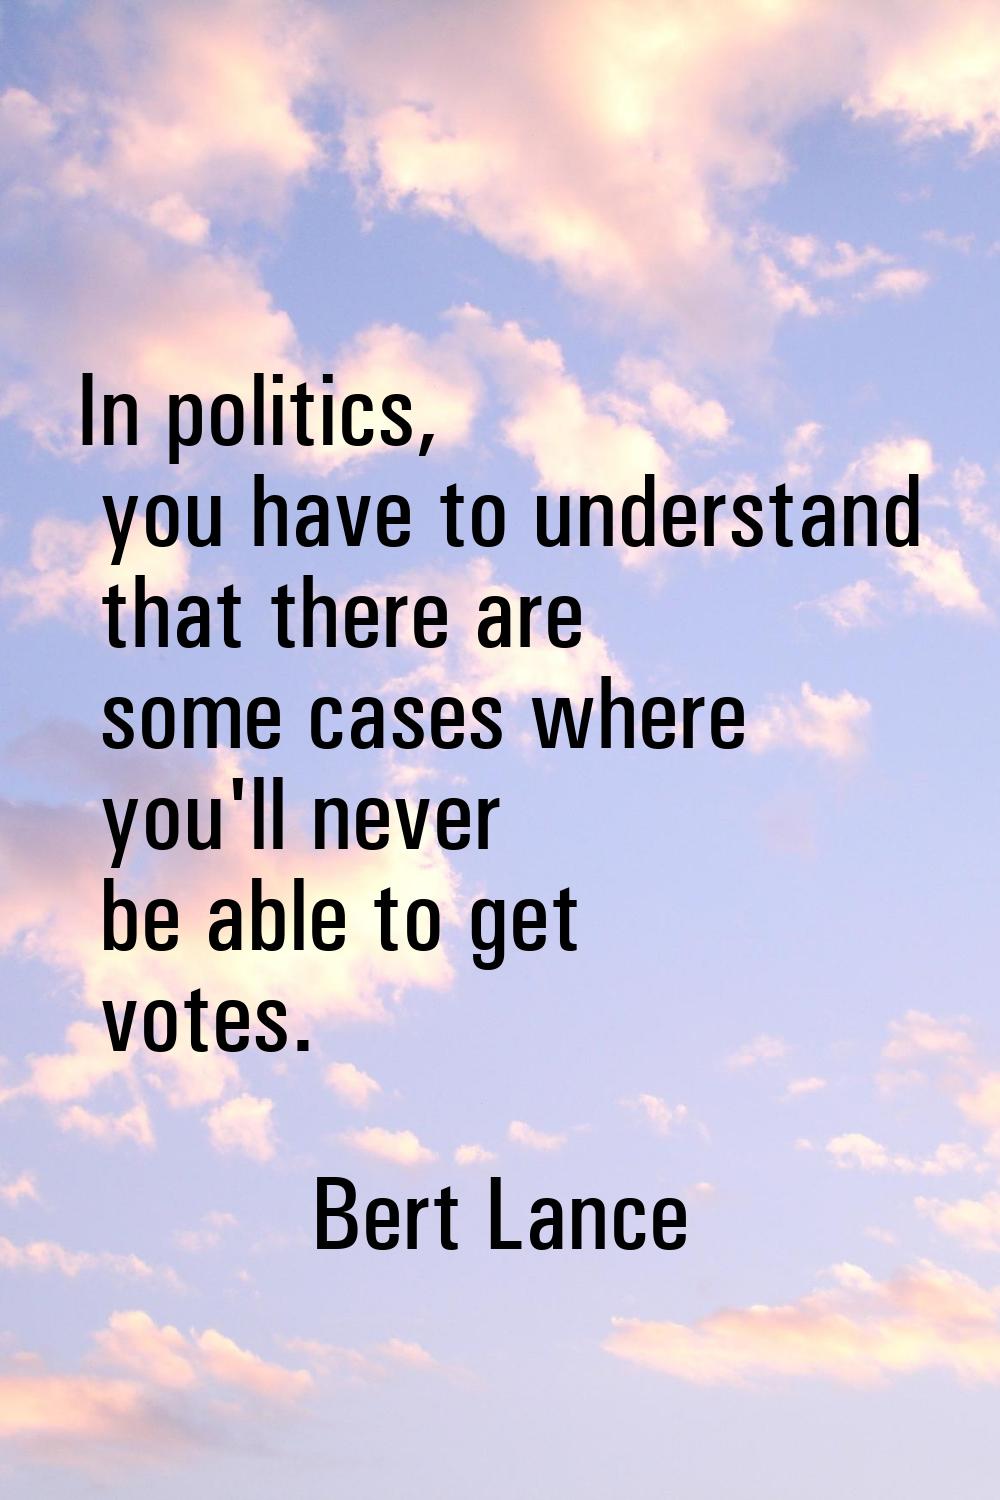 In politics, you have to understand that there are some cases where you'll never be able to get vot